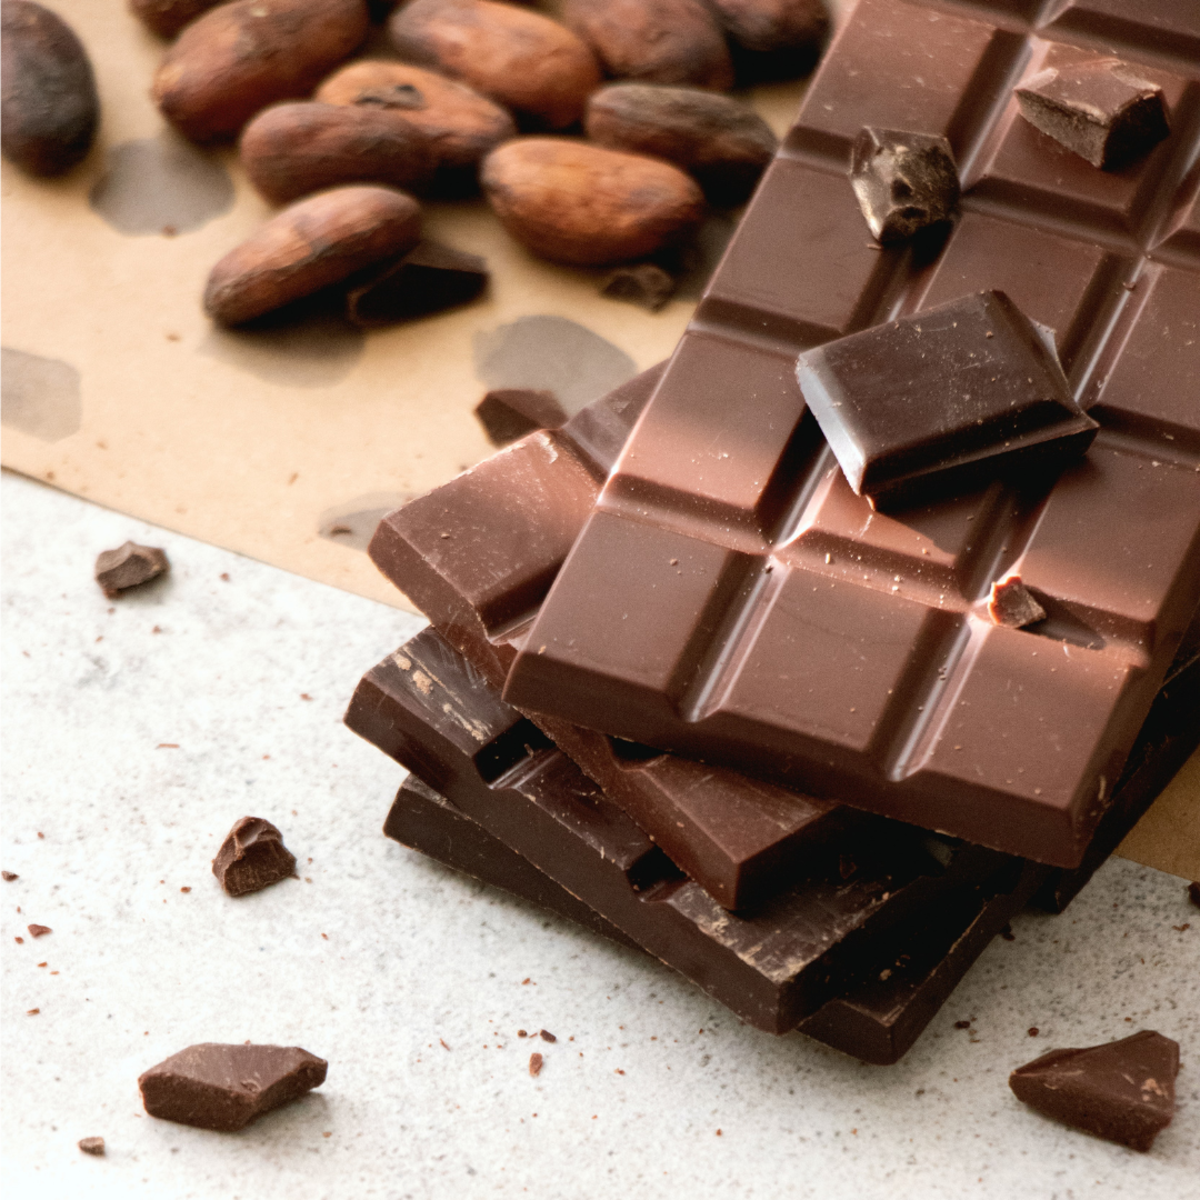 Which type of chocolate melts the fastest?